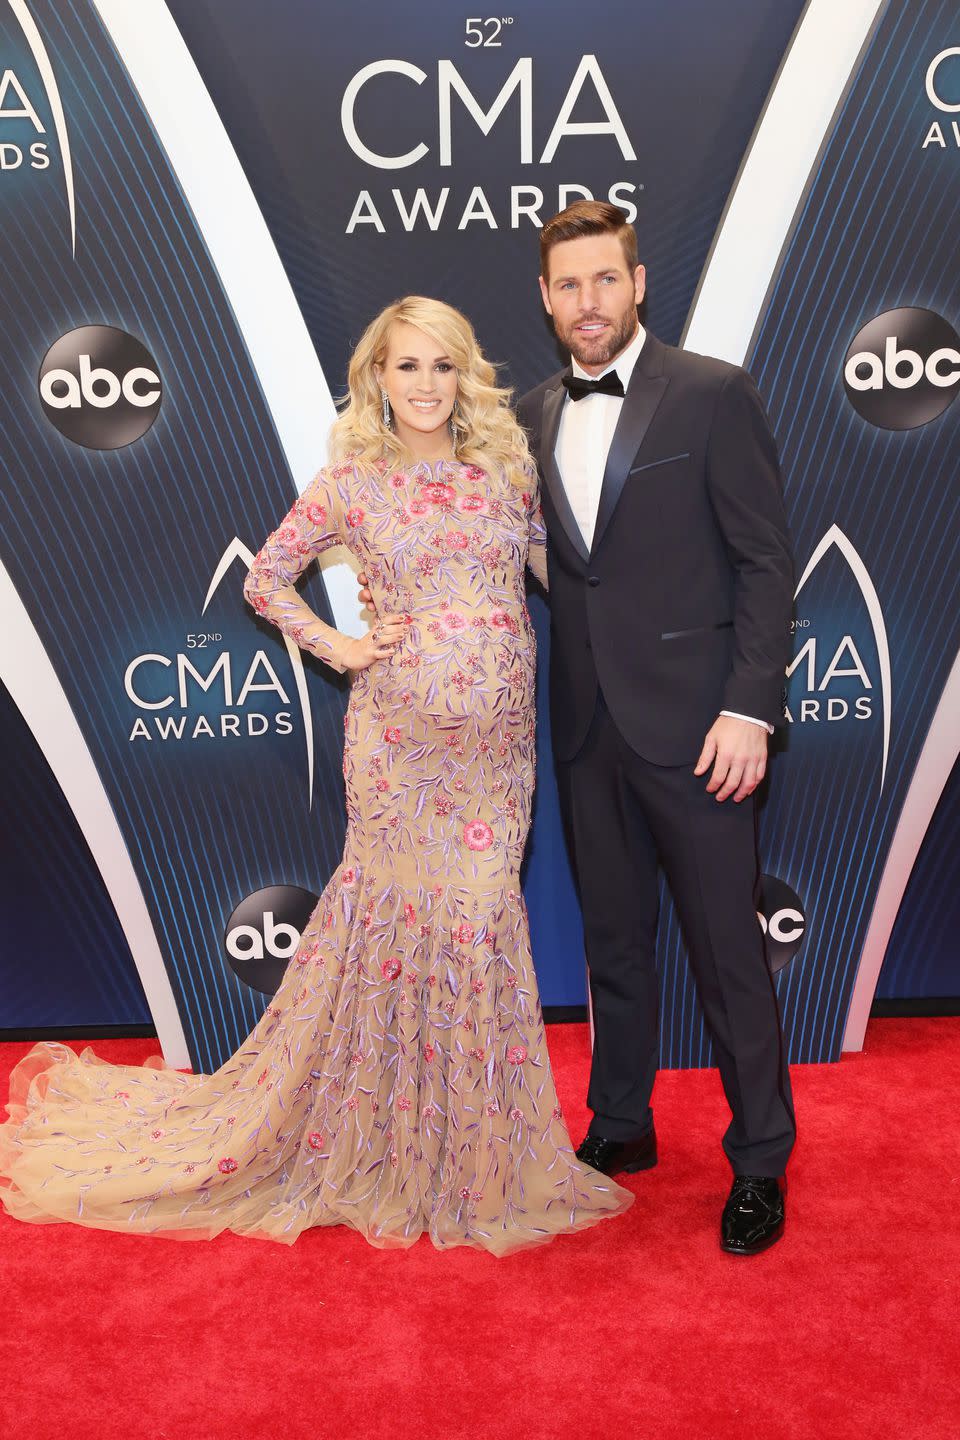 Carrie Underwood Revealed the Gender of Baby Number 2!